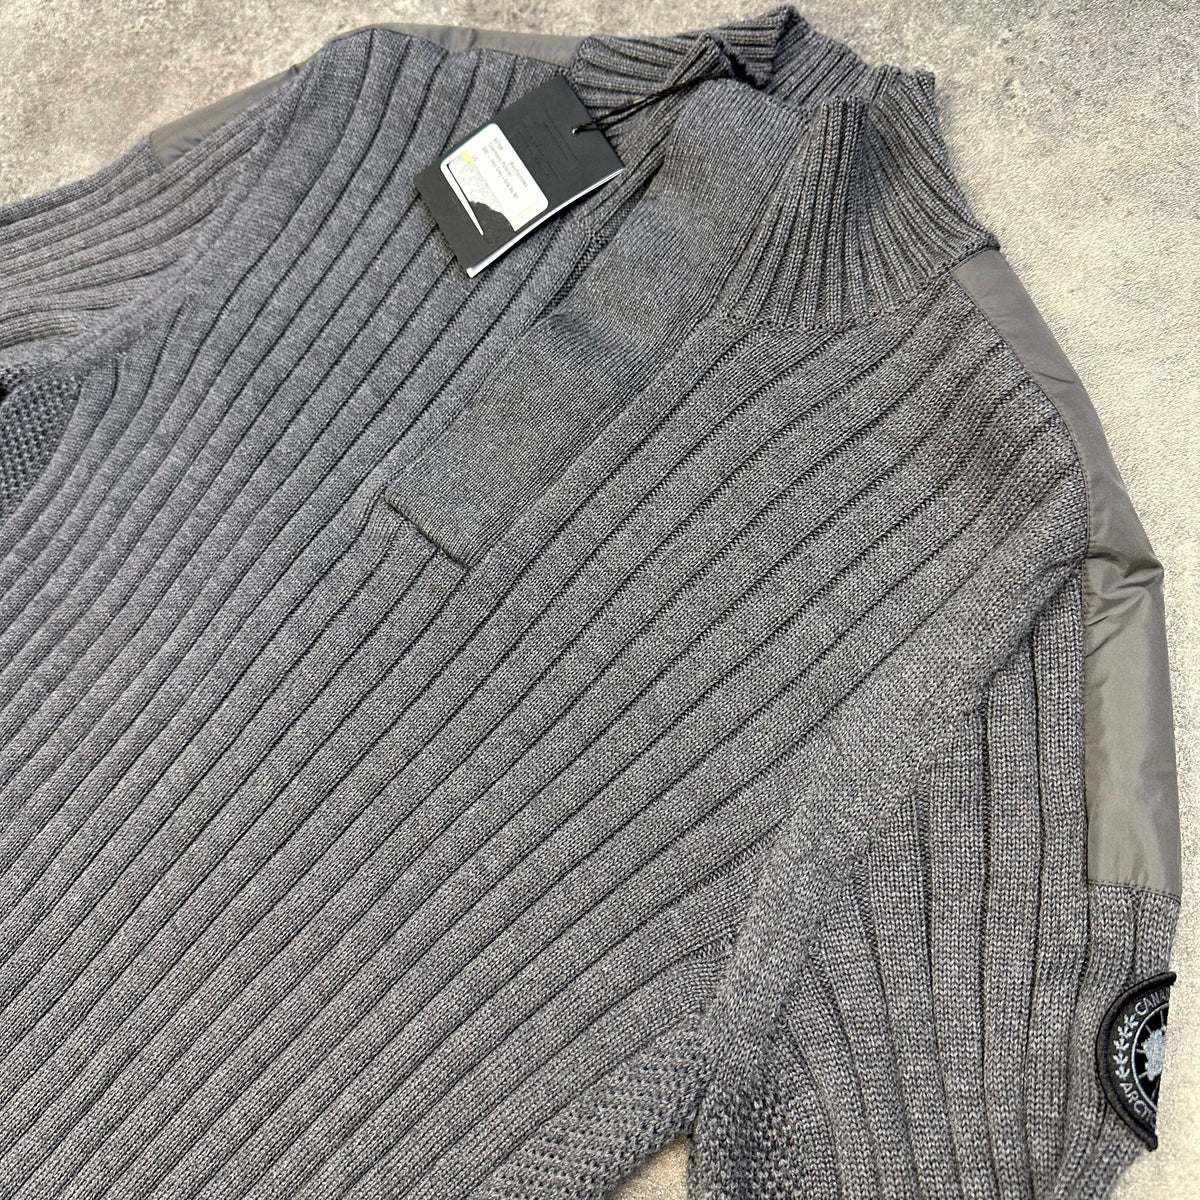 CANADA GOOSE 1/4 BUTTON RIBBED SWEATER CHARCOAL GREY